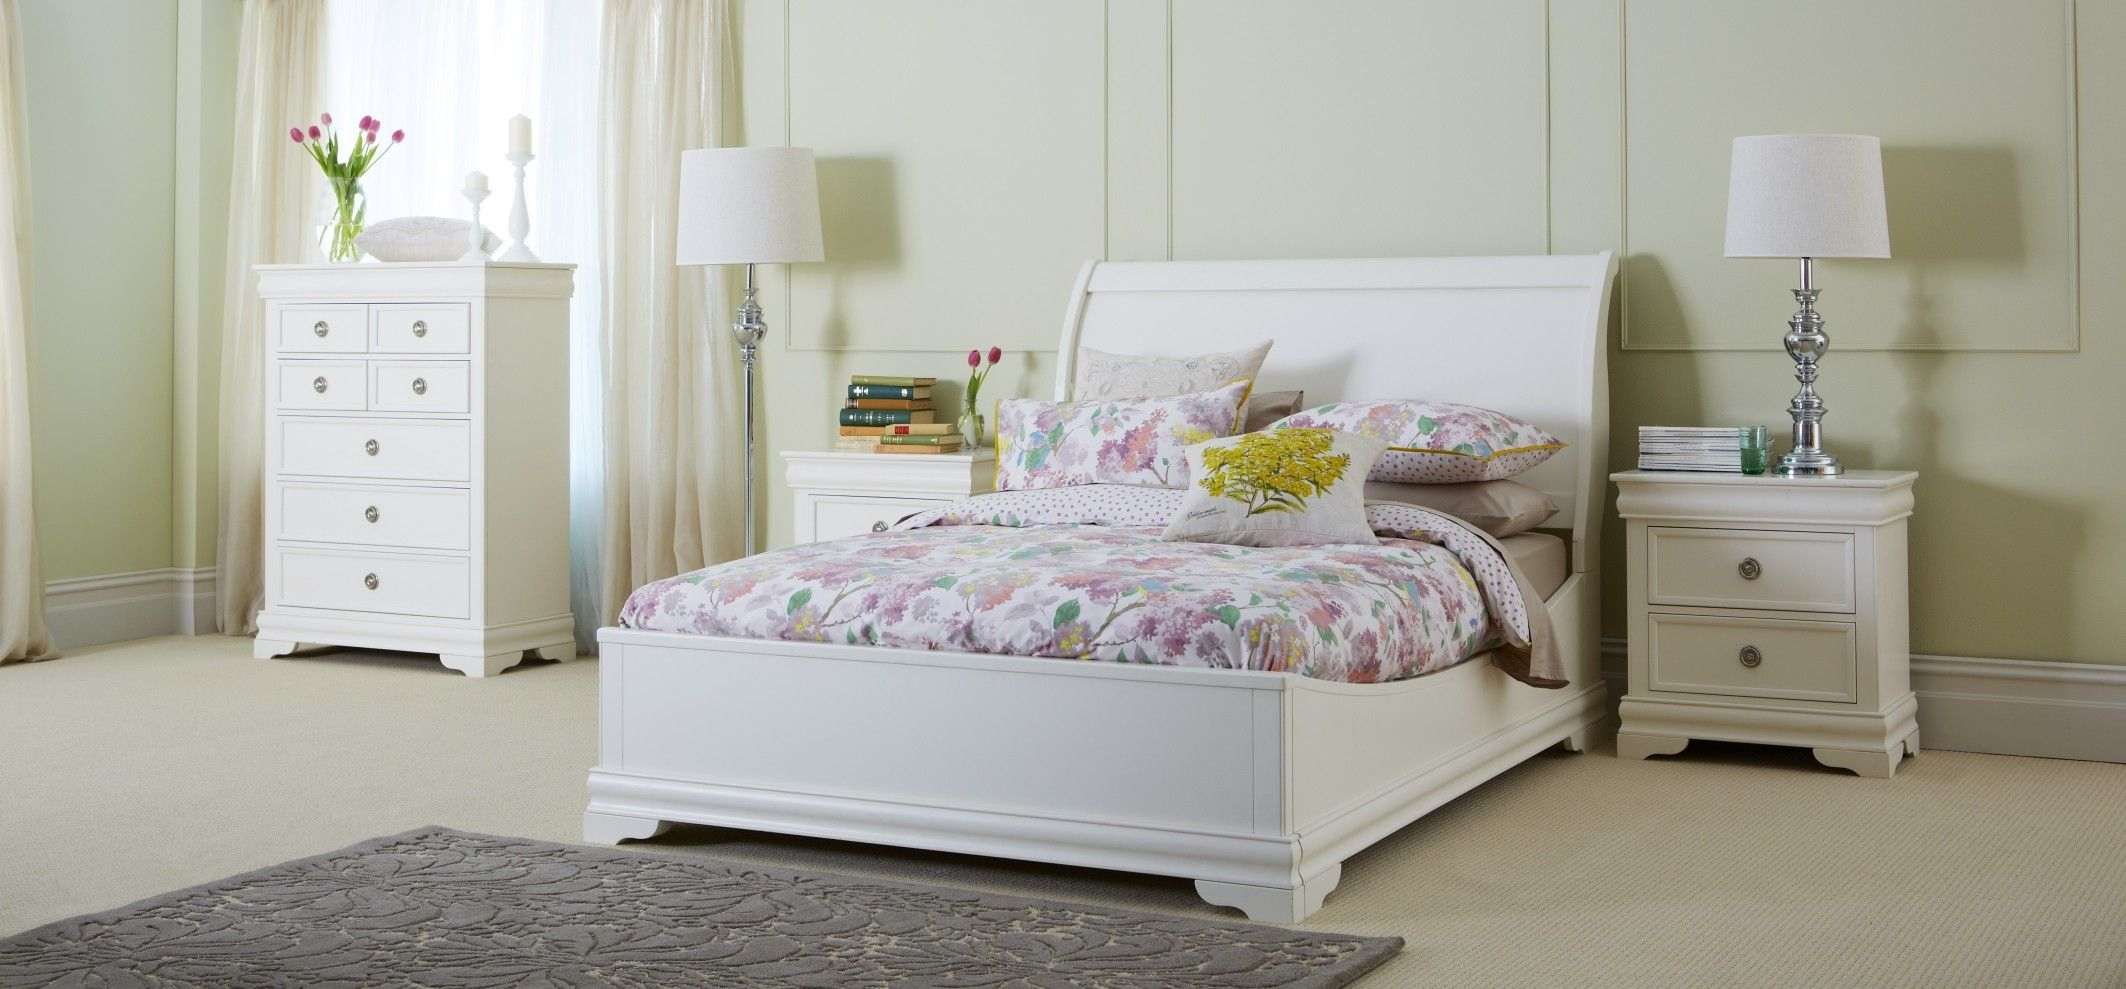 Solid Wood White Bedroom Furniture White Bedroom Furniture White in measurements 2126 X 989